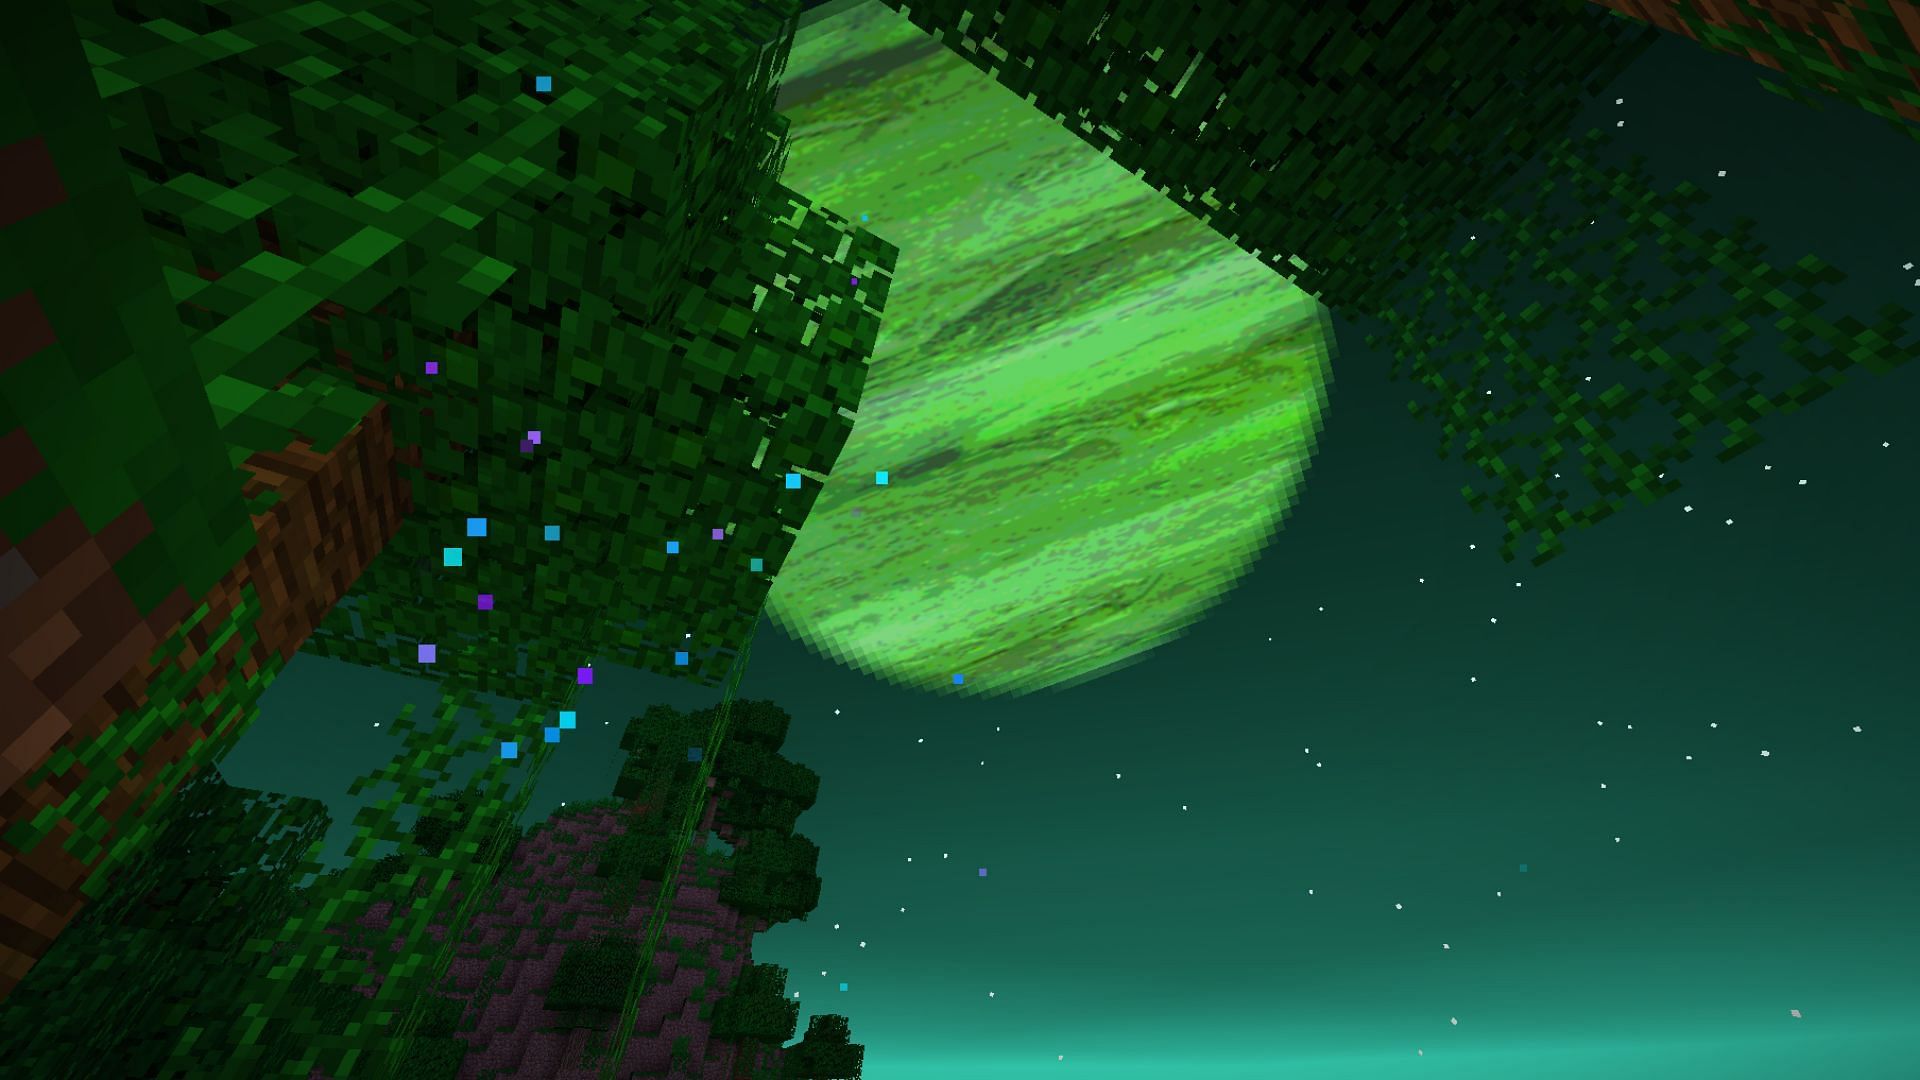 Futurepack mod adds brand new kinds of fictional planets and biomes in Minecraft (Image via CurseForge)